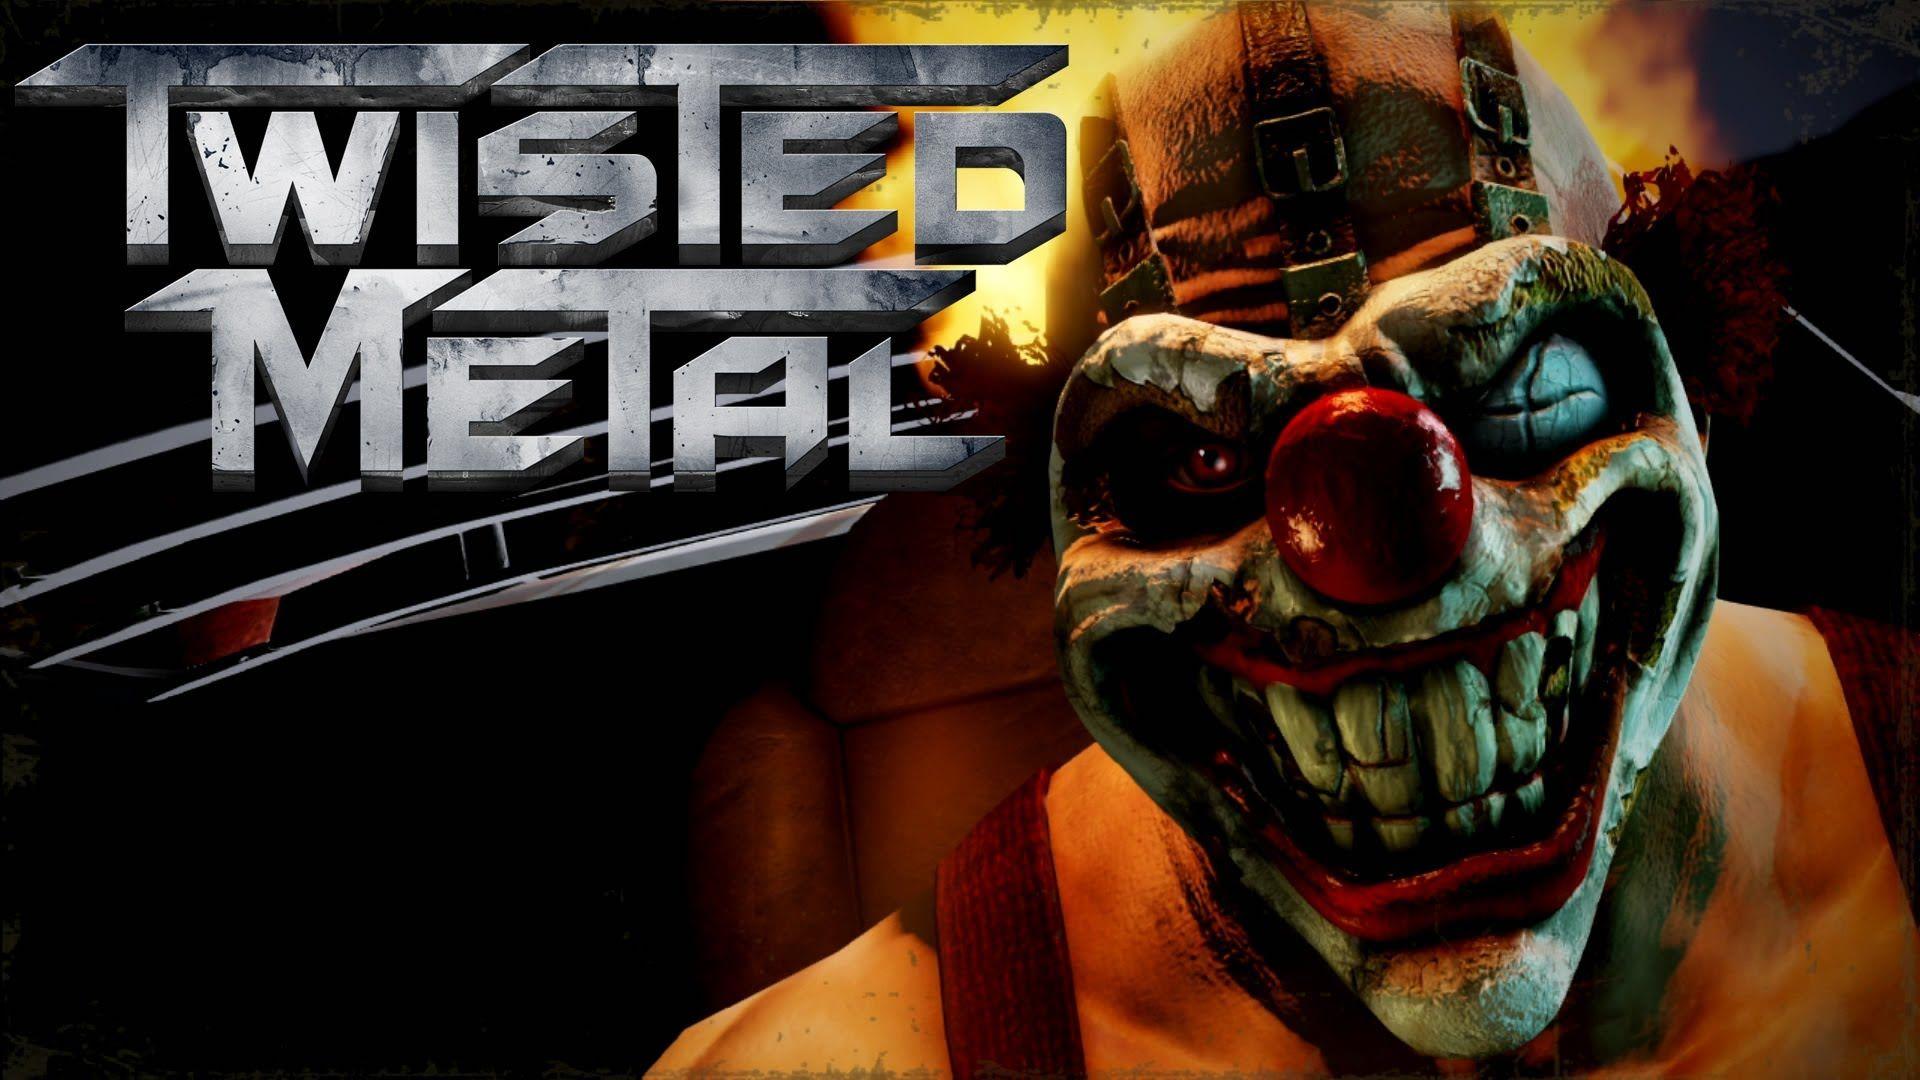 image For > Twisted Metal Ps3 Wallpaper Metal